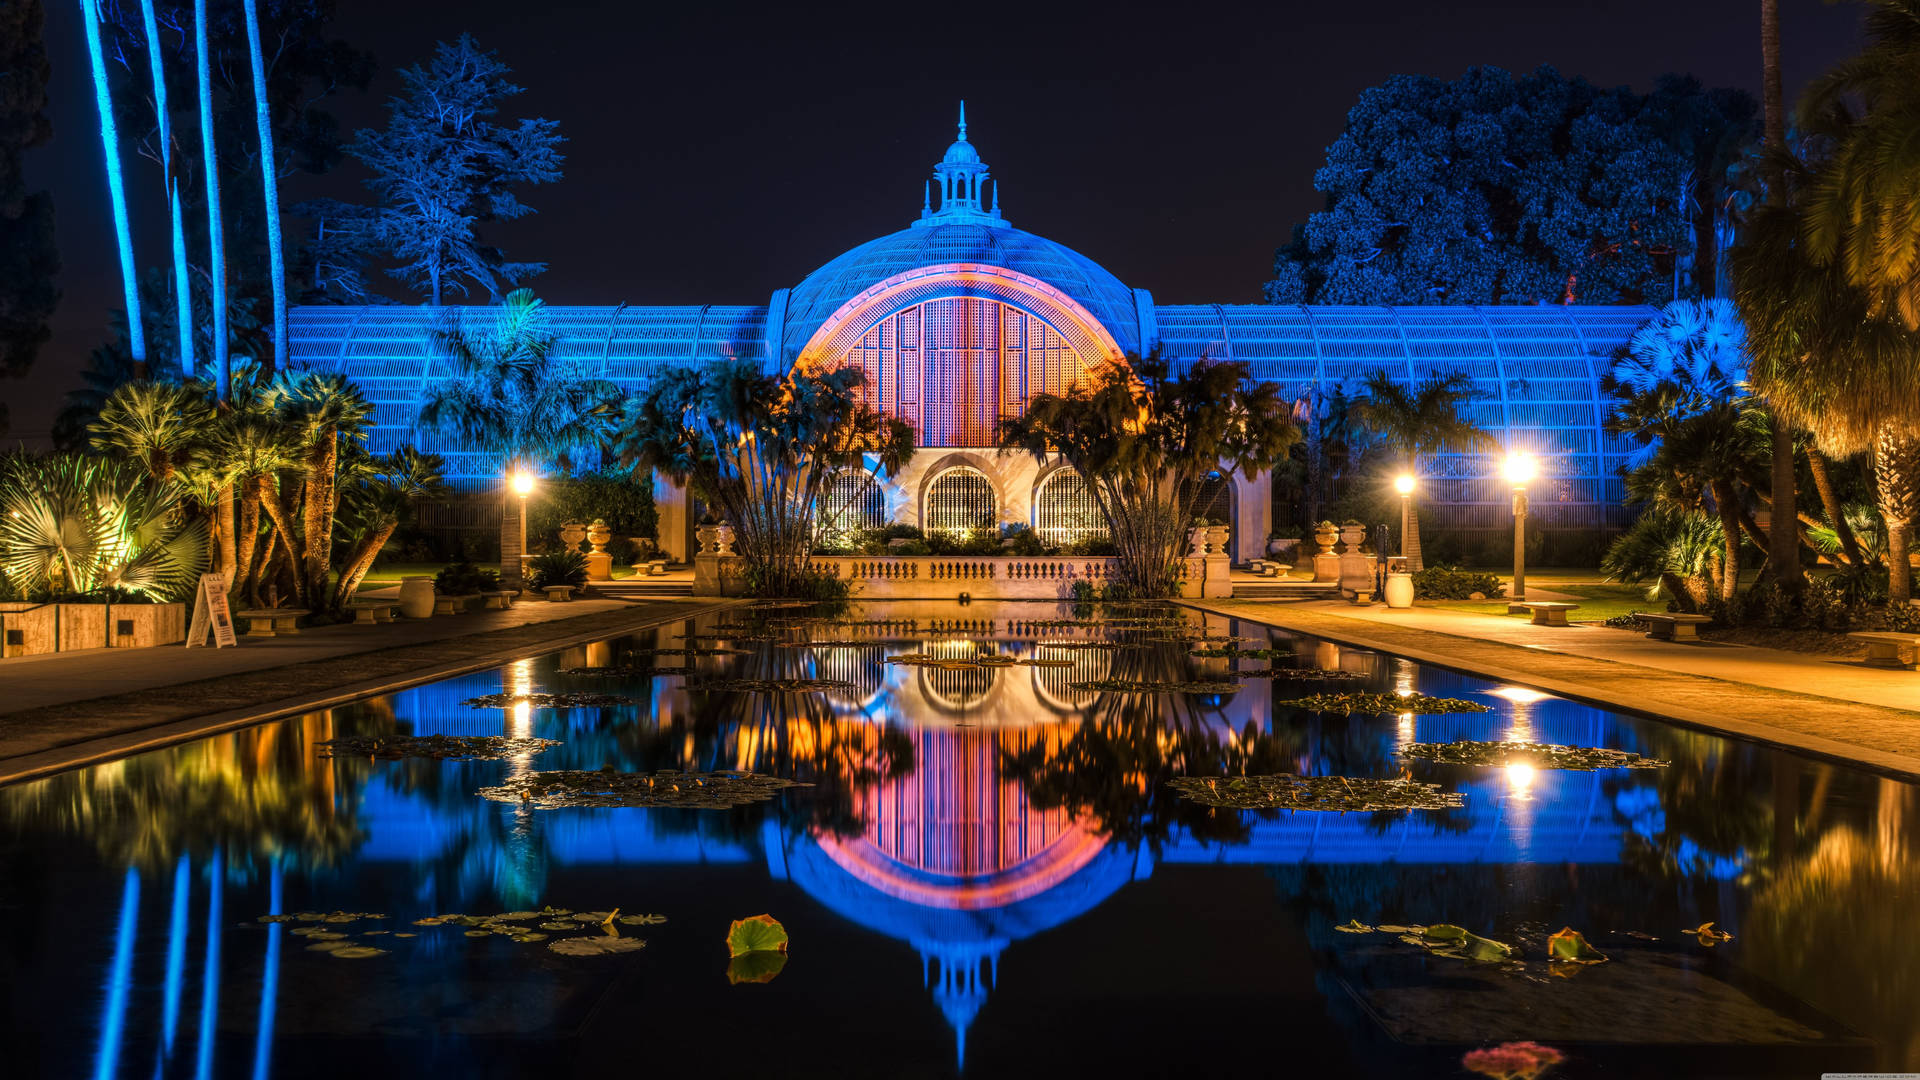 Enjoy an afternoon visiting the picturesque Balboa Park in San Diego Wallpaper